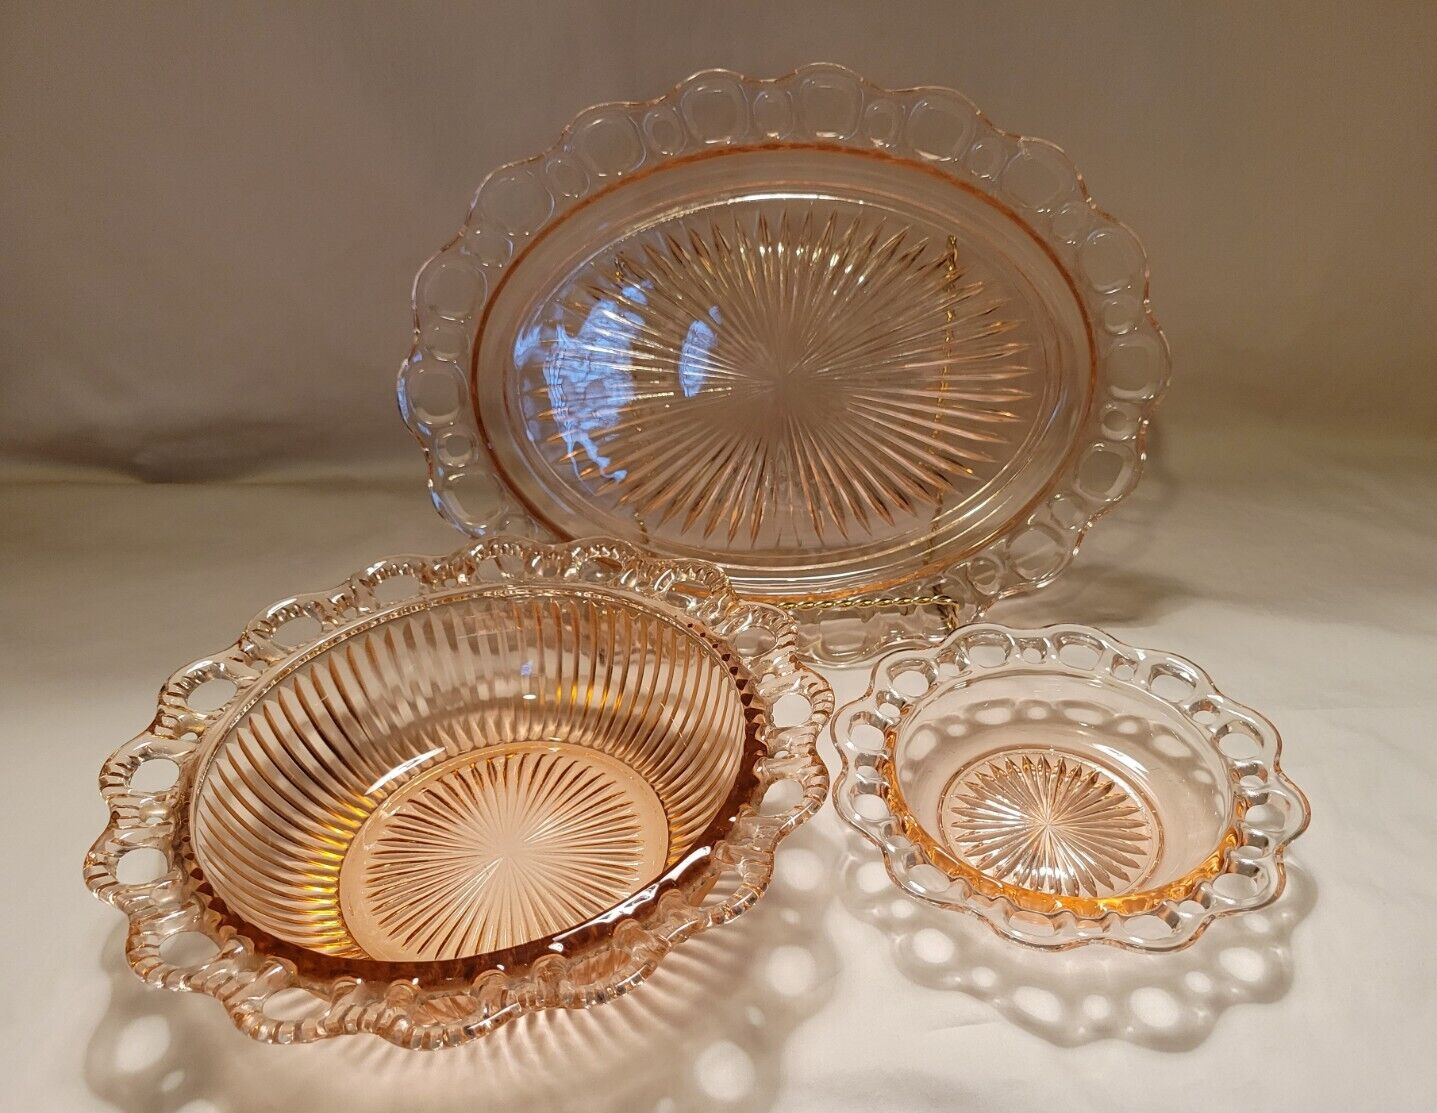 Vintage Anchor Hocking Old Colony Lace Edge, Pink Depression Glass, 3 Piece Set